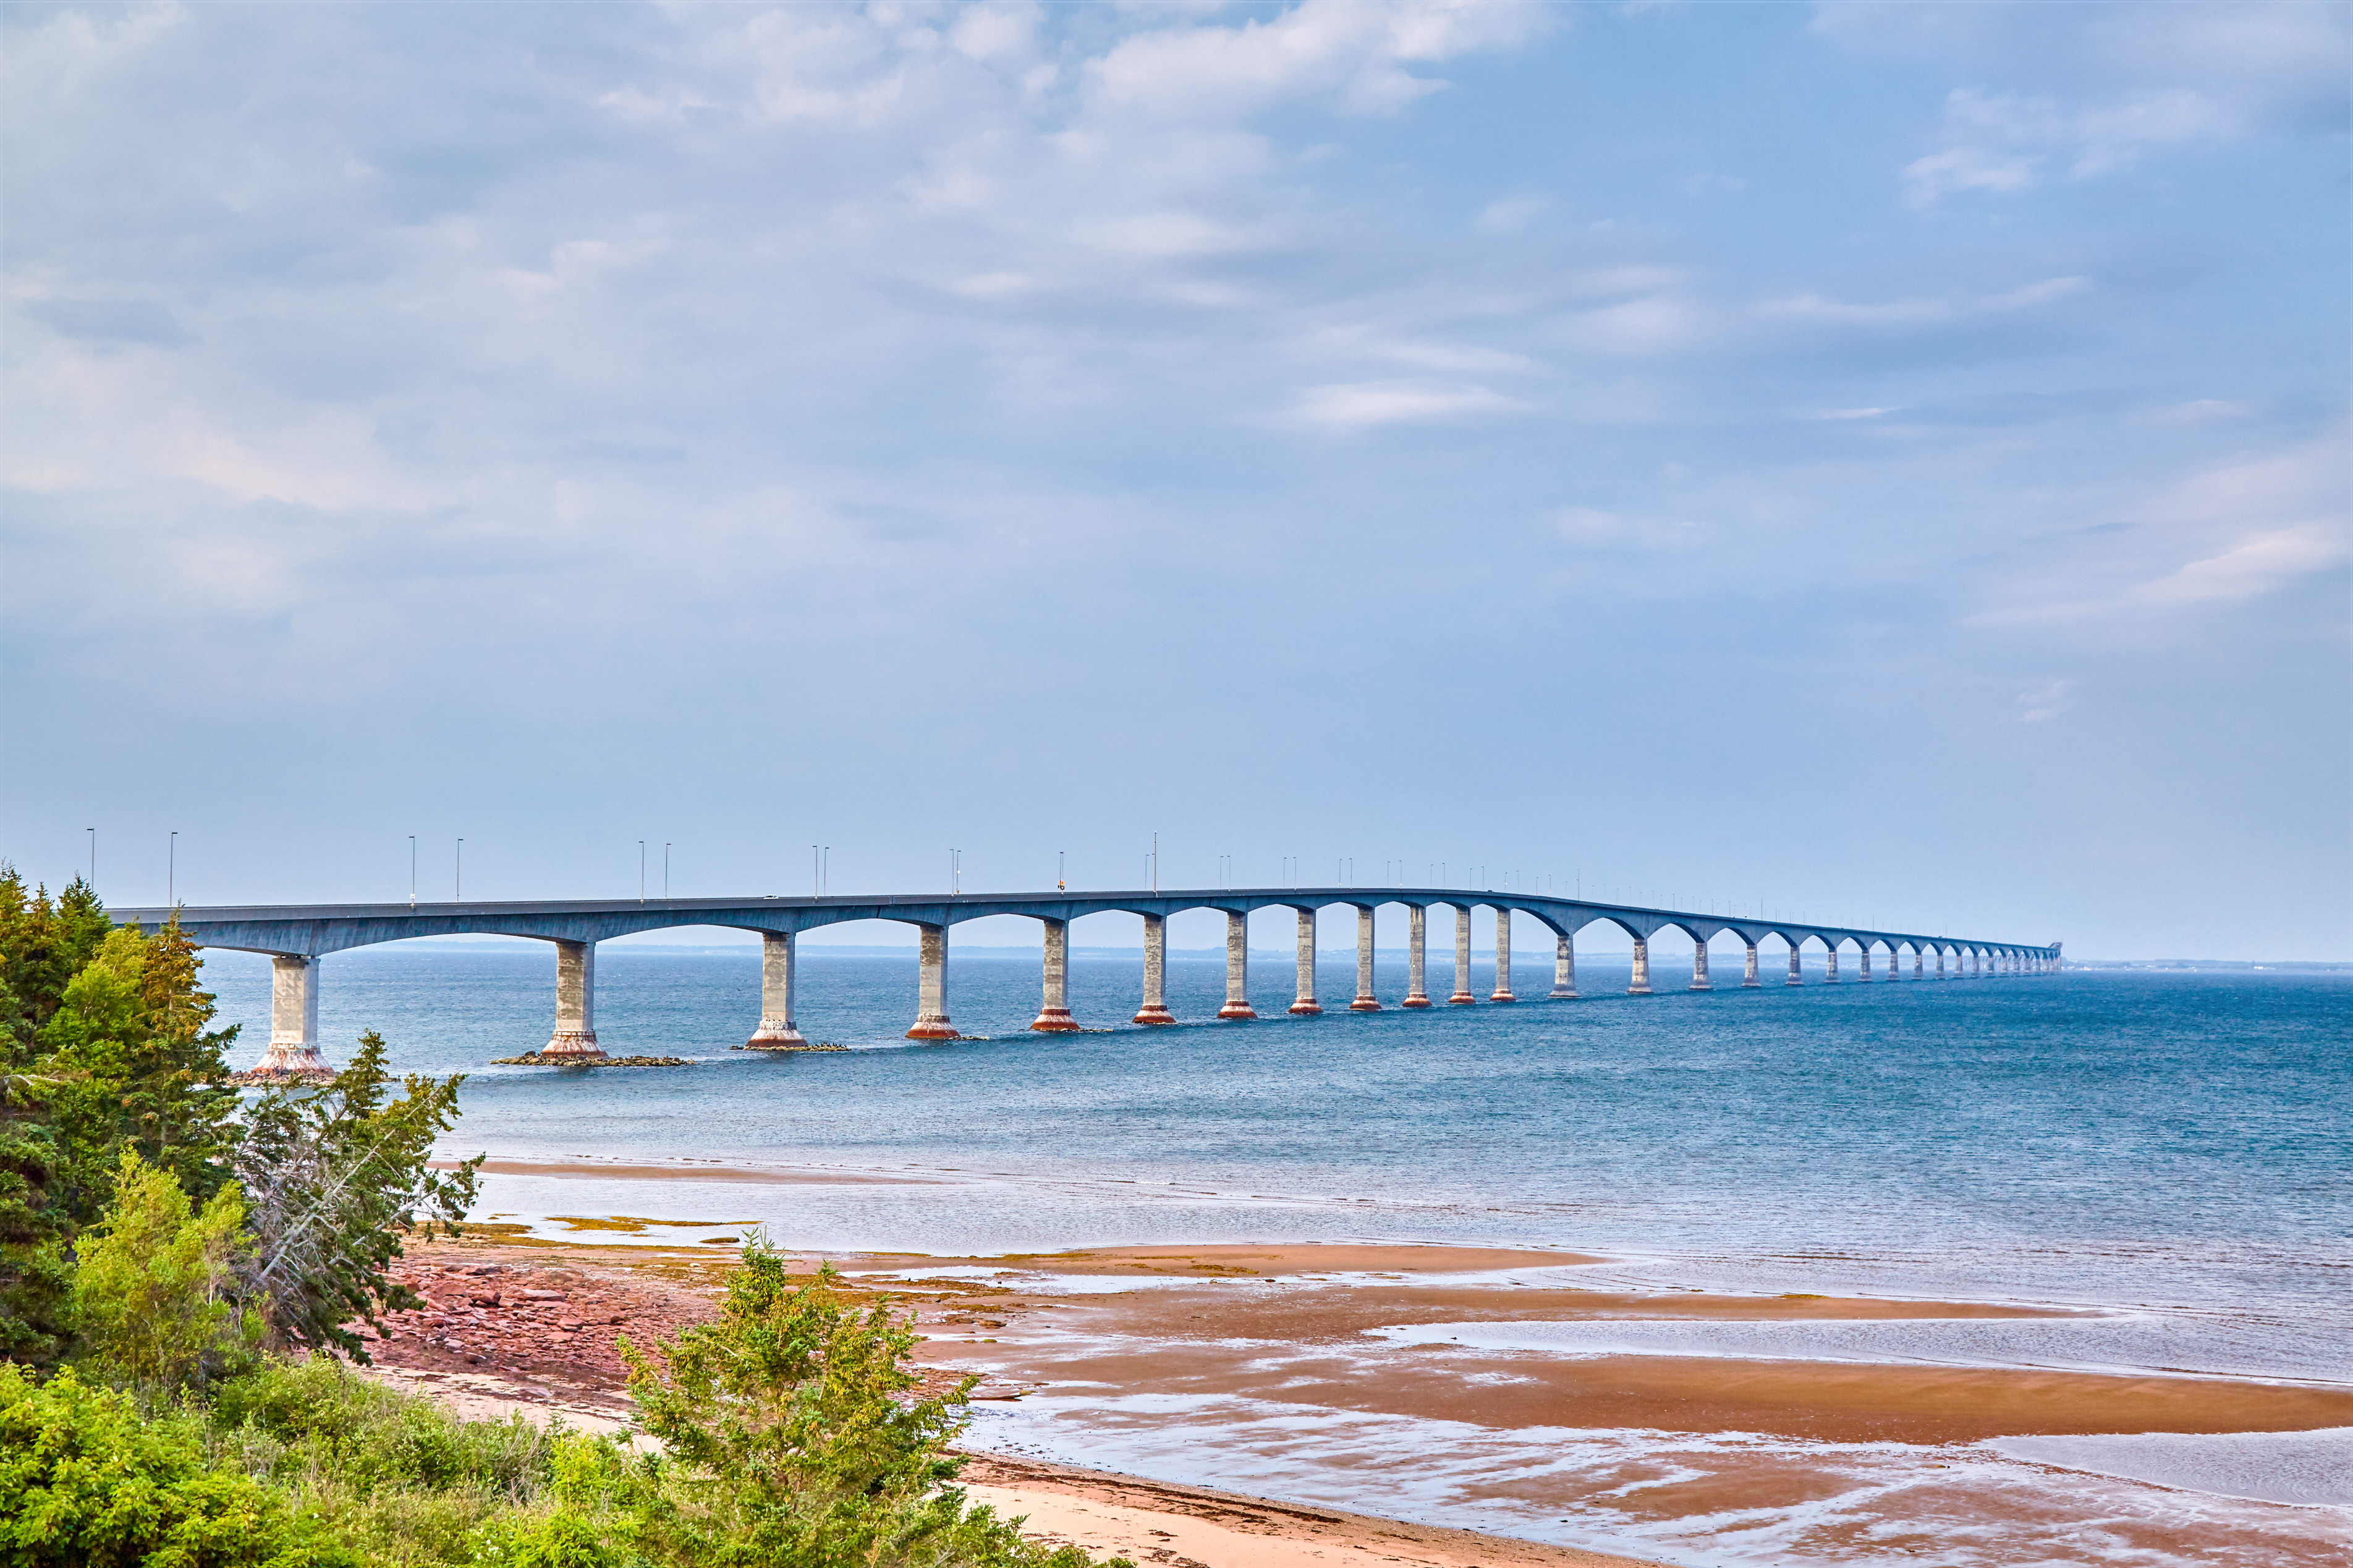 Long bridge extending over calm water with sandy beach in the foreground